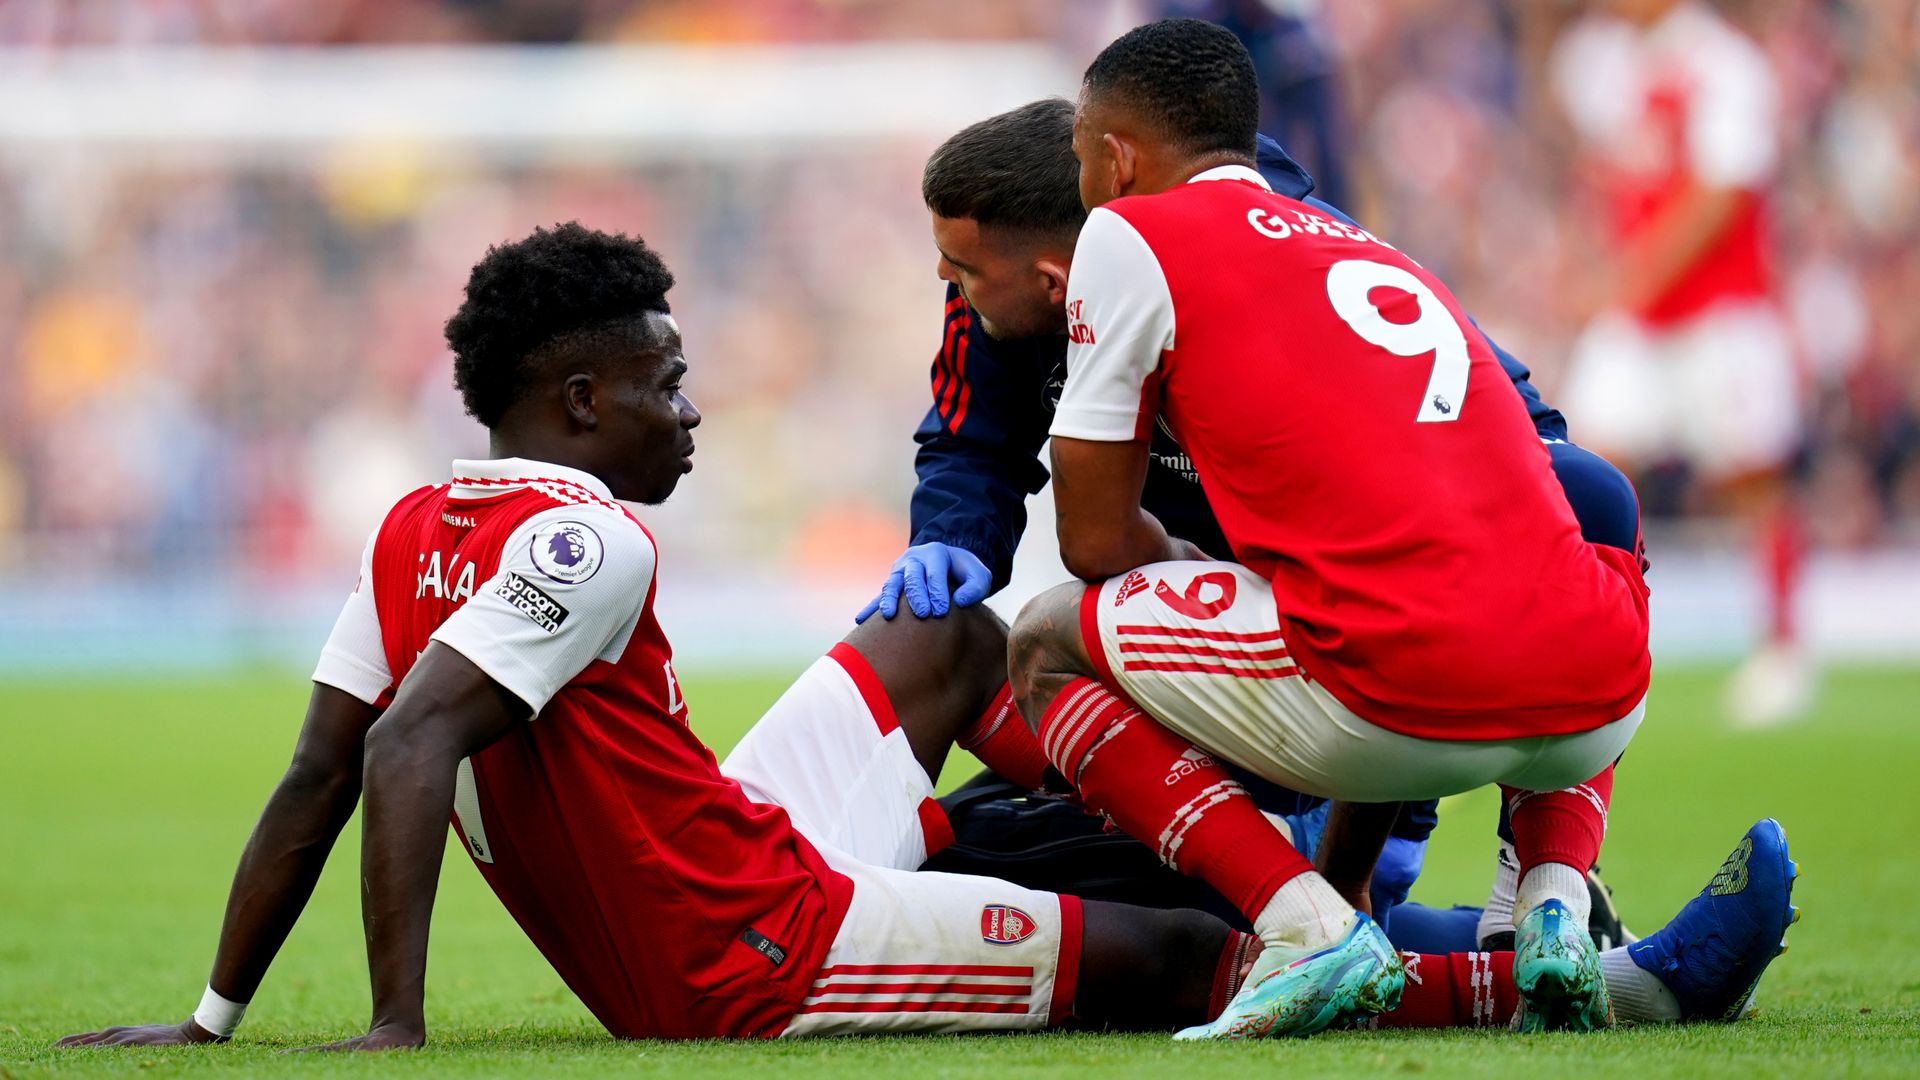 World Cup concerns for Saka after injury | Arteta: 'A bad kick - nothing further'